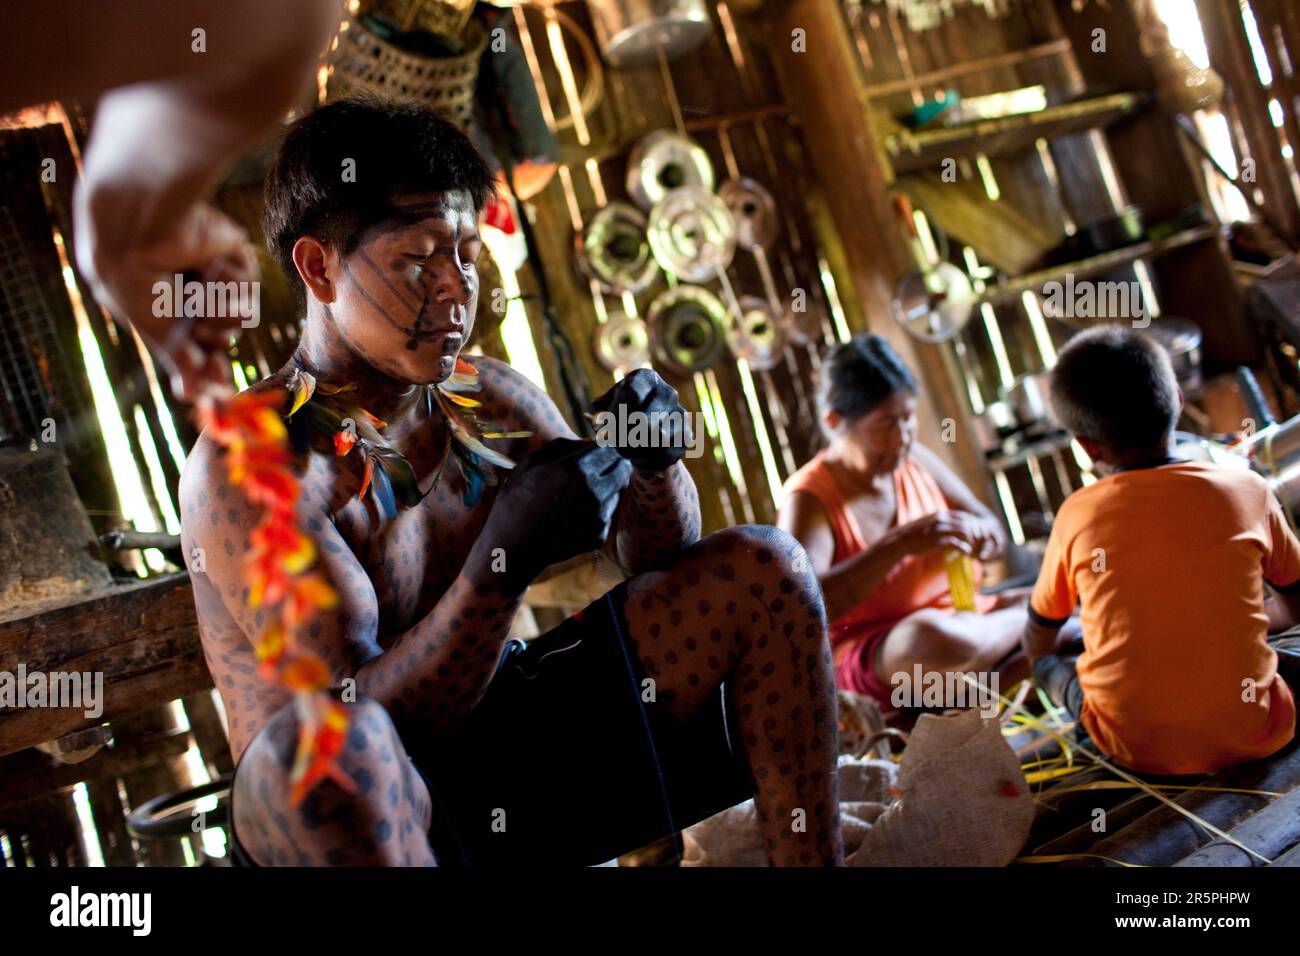 Members of the Oro Win tribe make preparations and body decorations for an upcoming traditional 'festa' or celebration, Sao Luis Indian Post, Brazil. Stock Photo